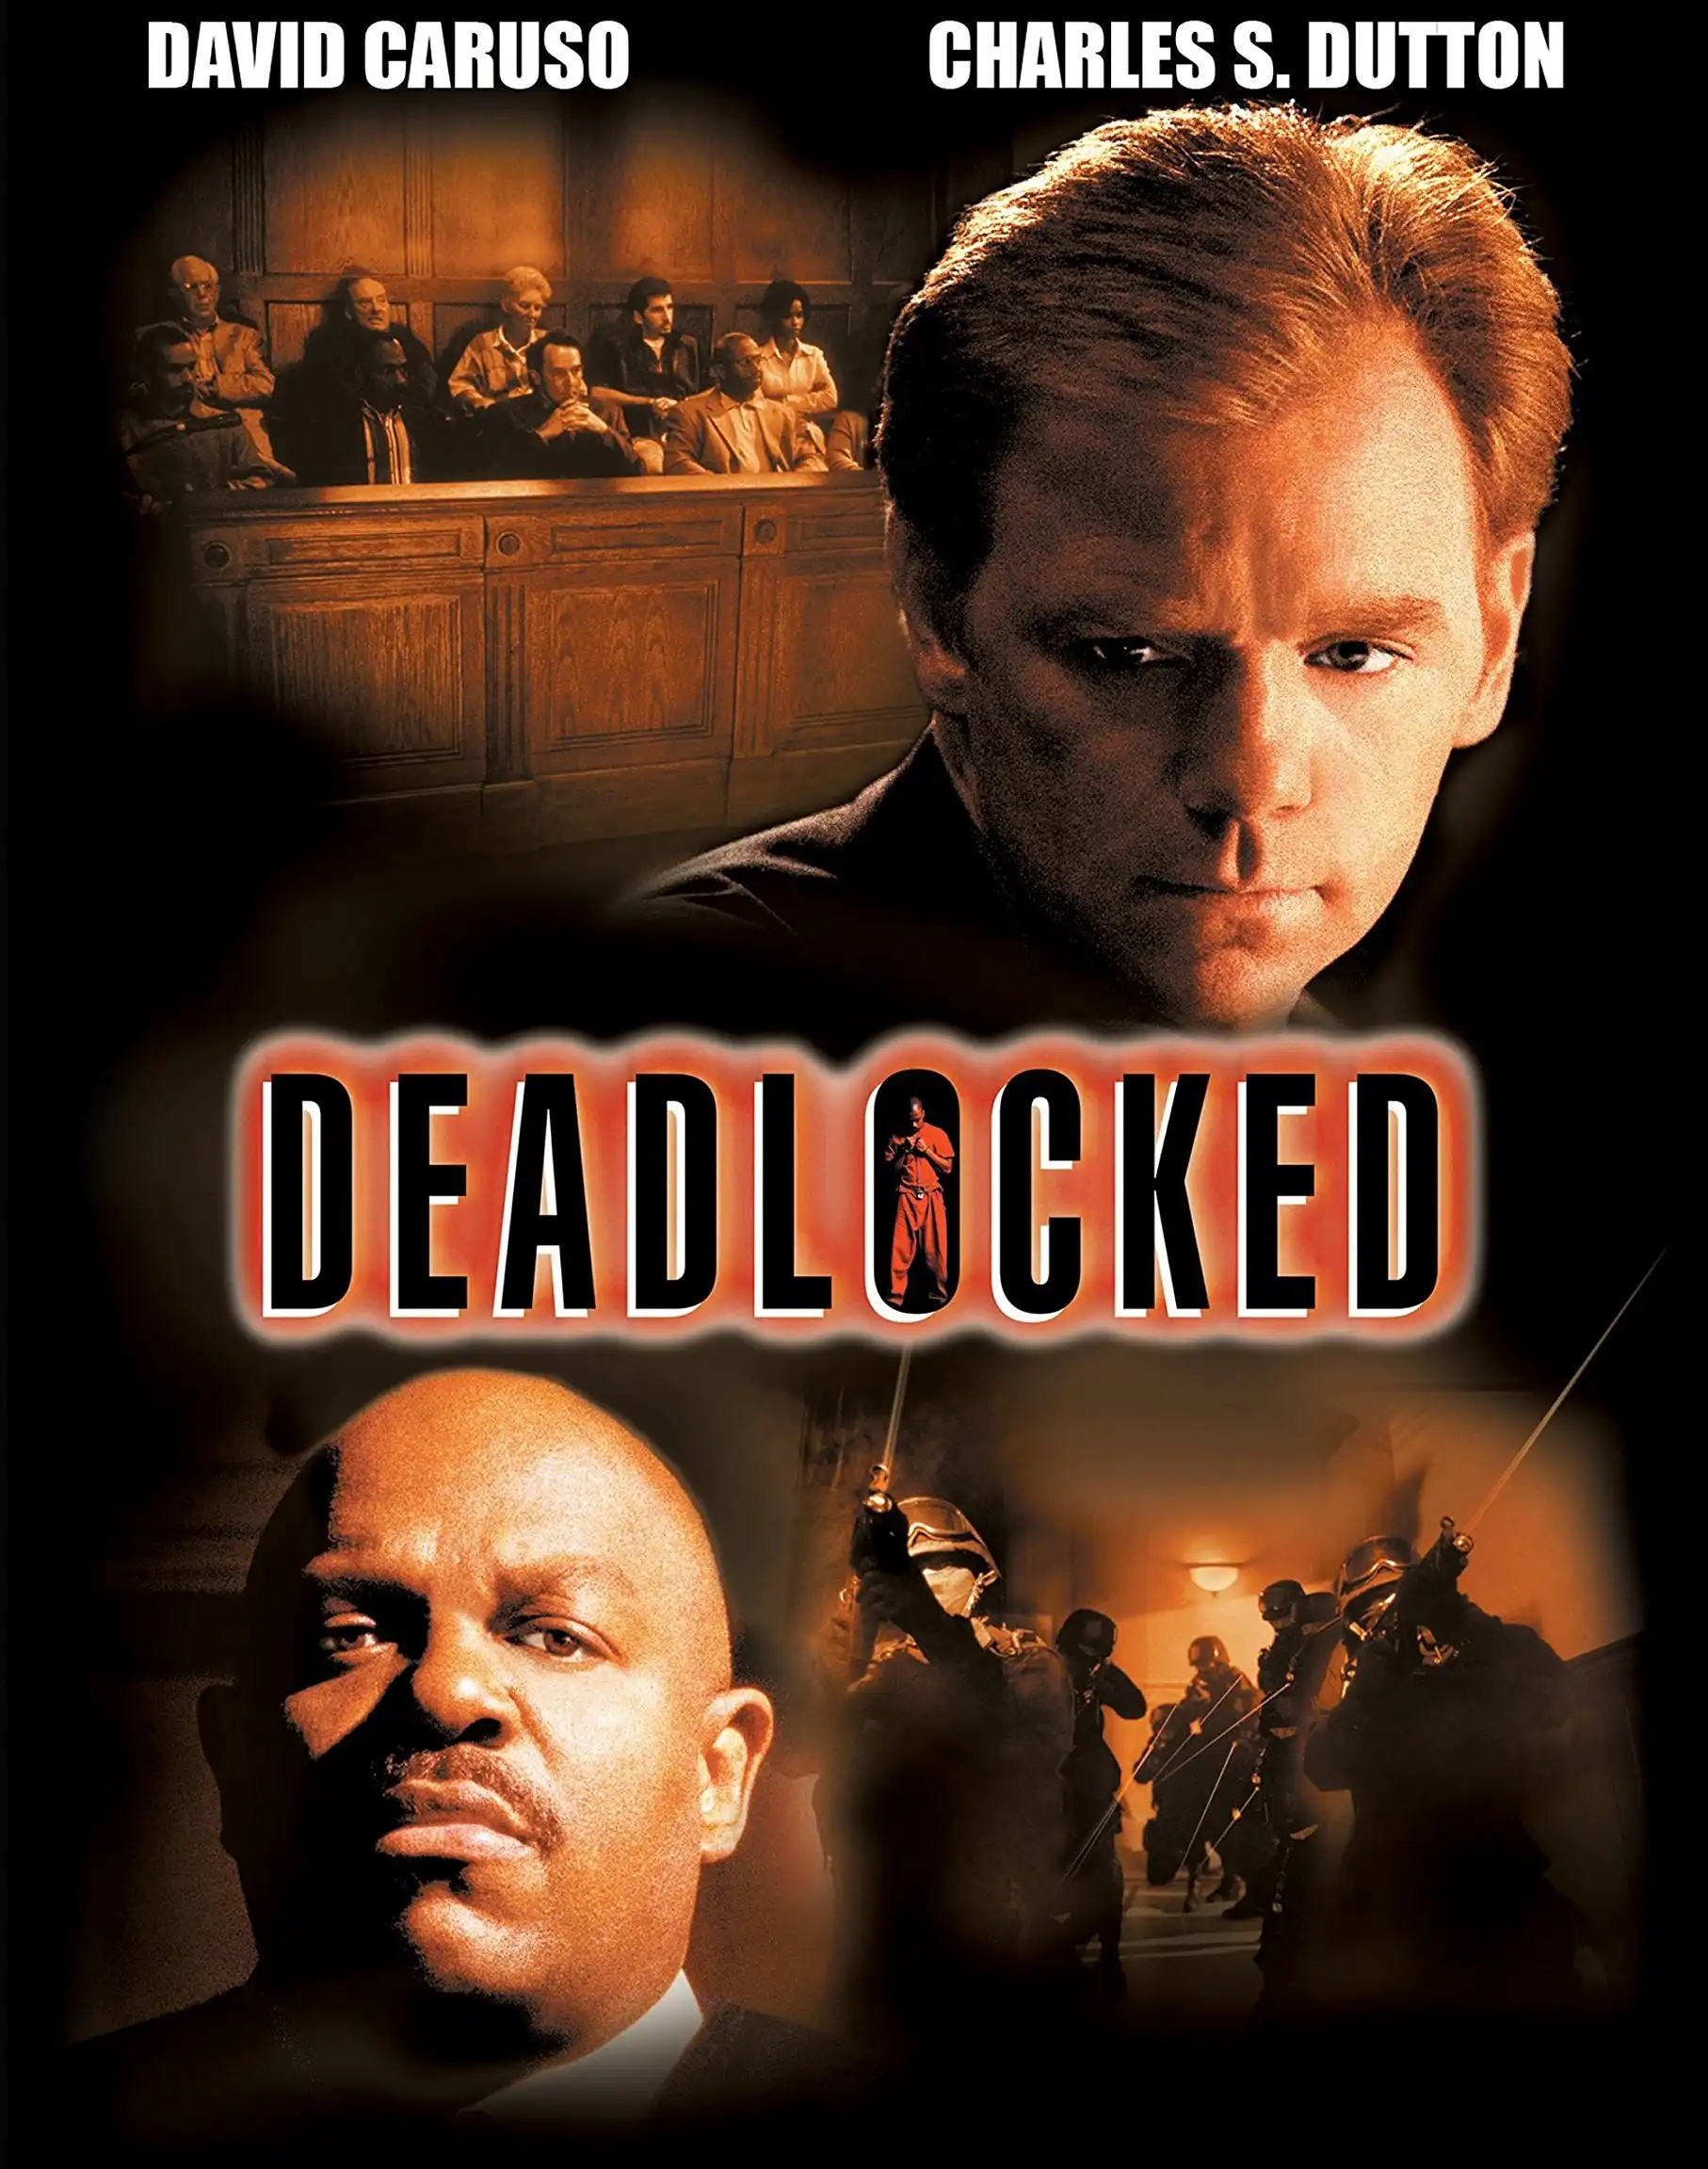 Watch and Download Deadlocked 2